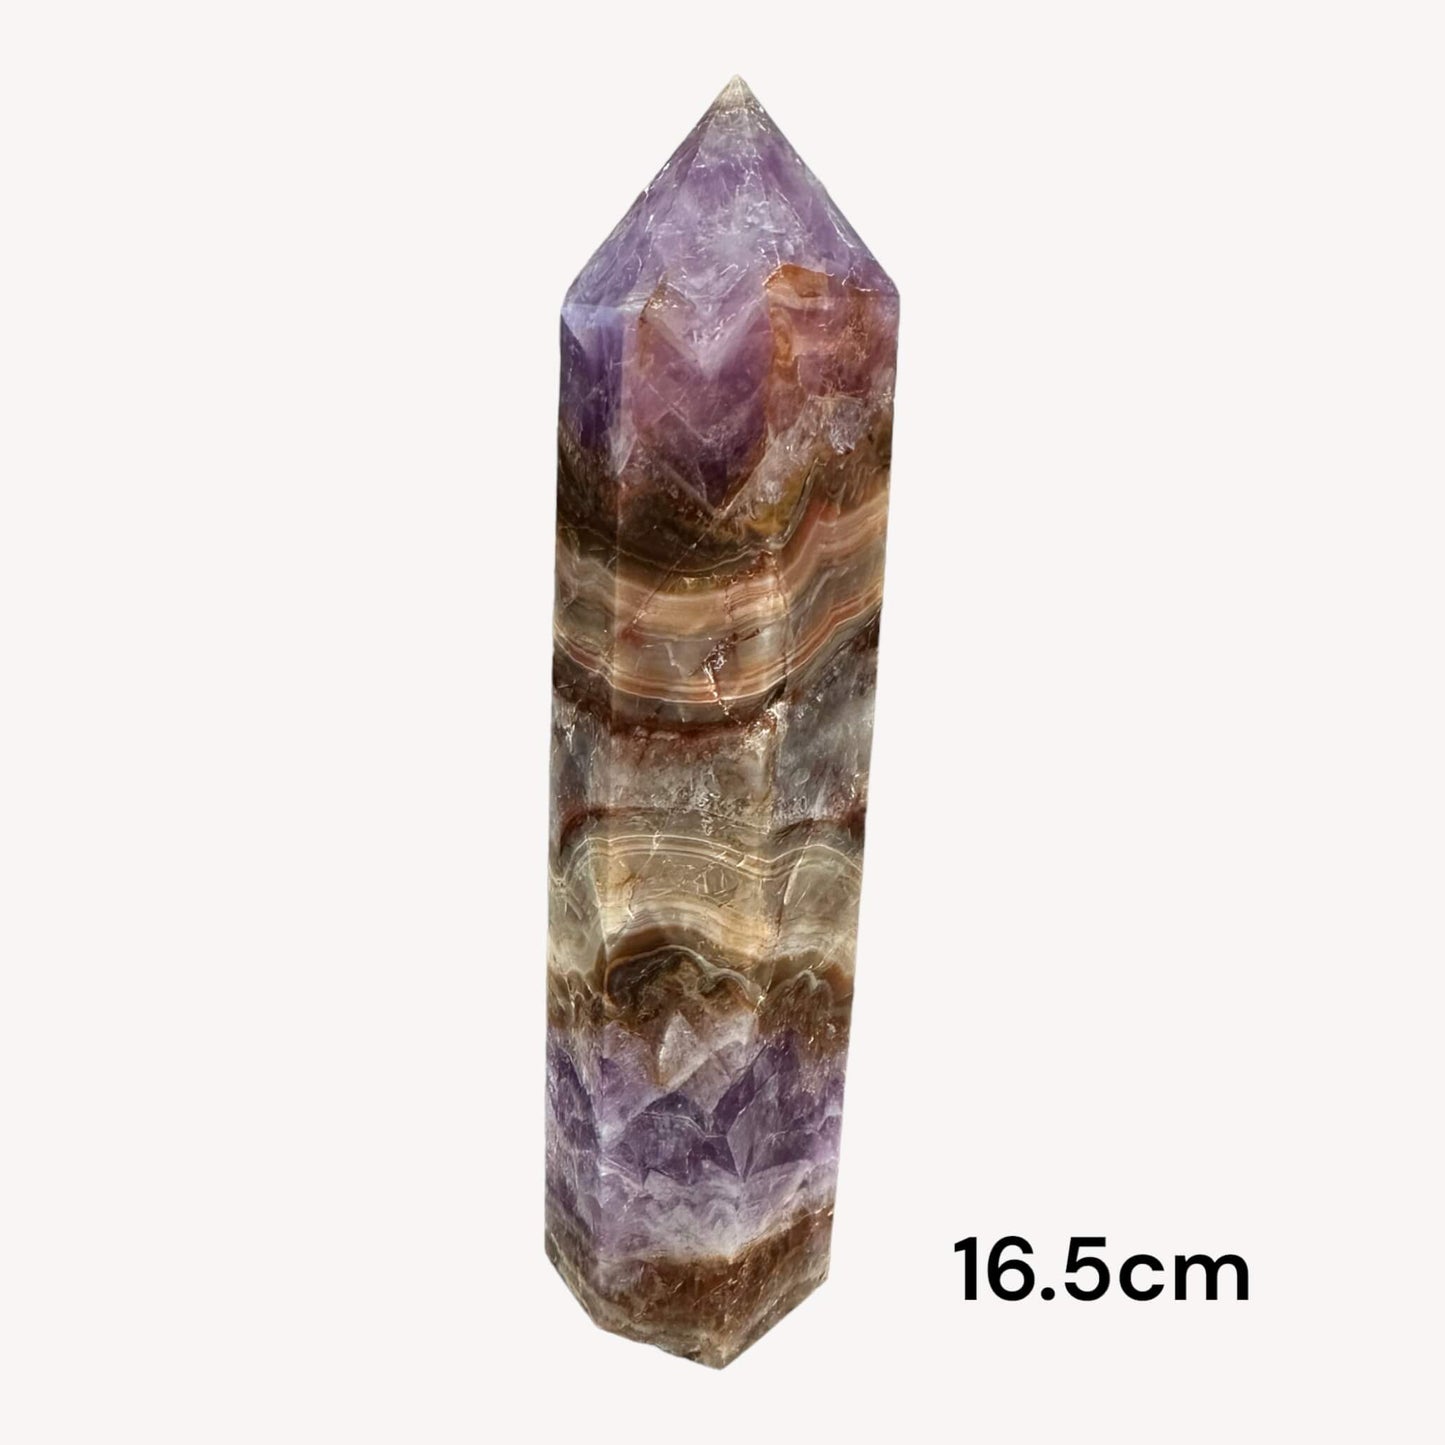 Front view of a small Crazy Lace Agate and Amethyst Crystal Generator (16.5cm high). The intricate patterns and calming hues make it a captivating addition to any crystal collection.